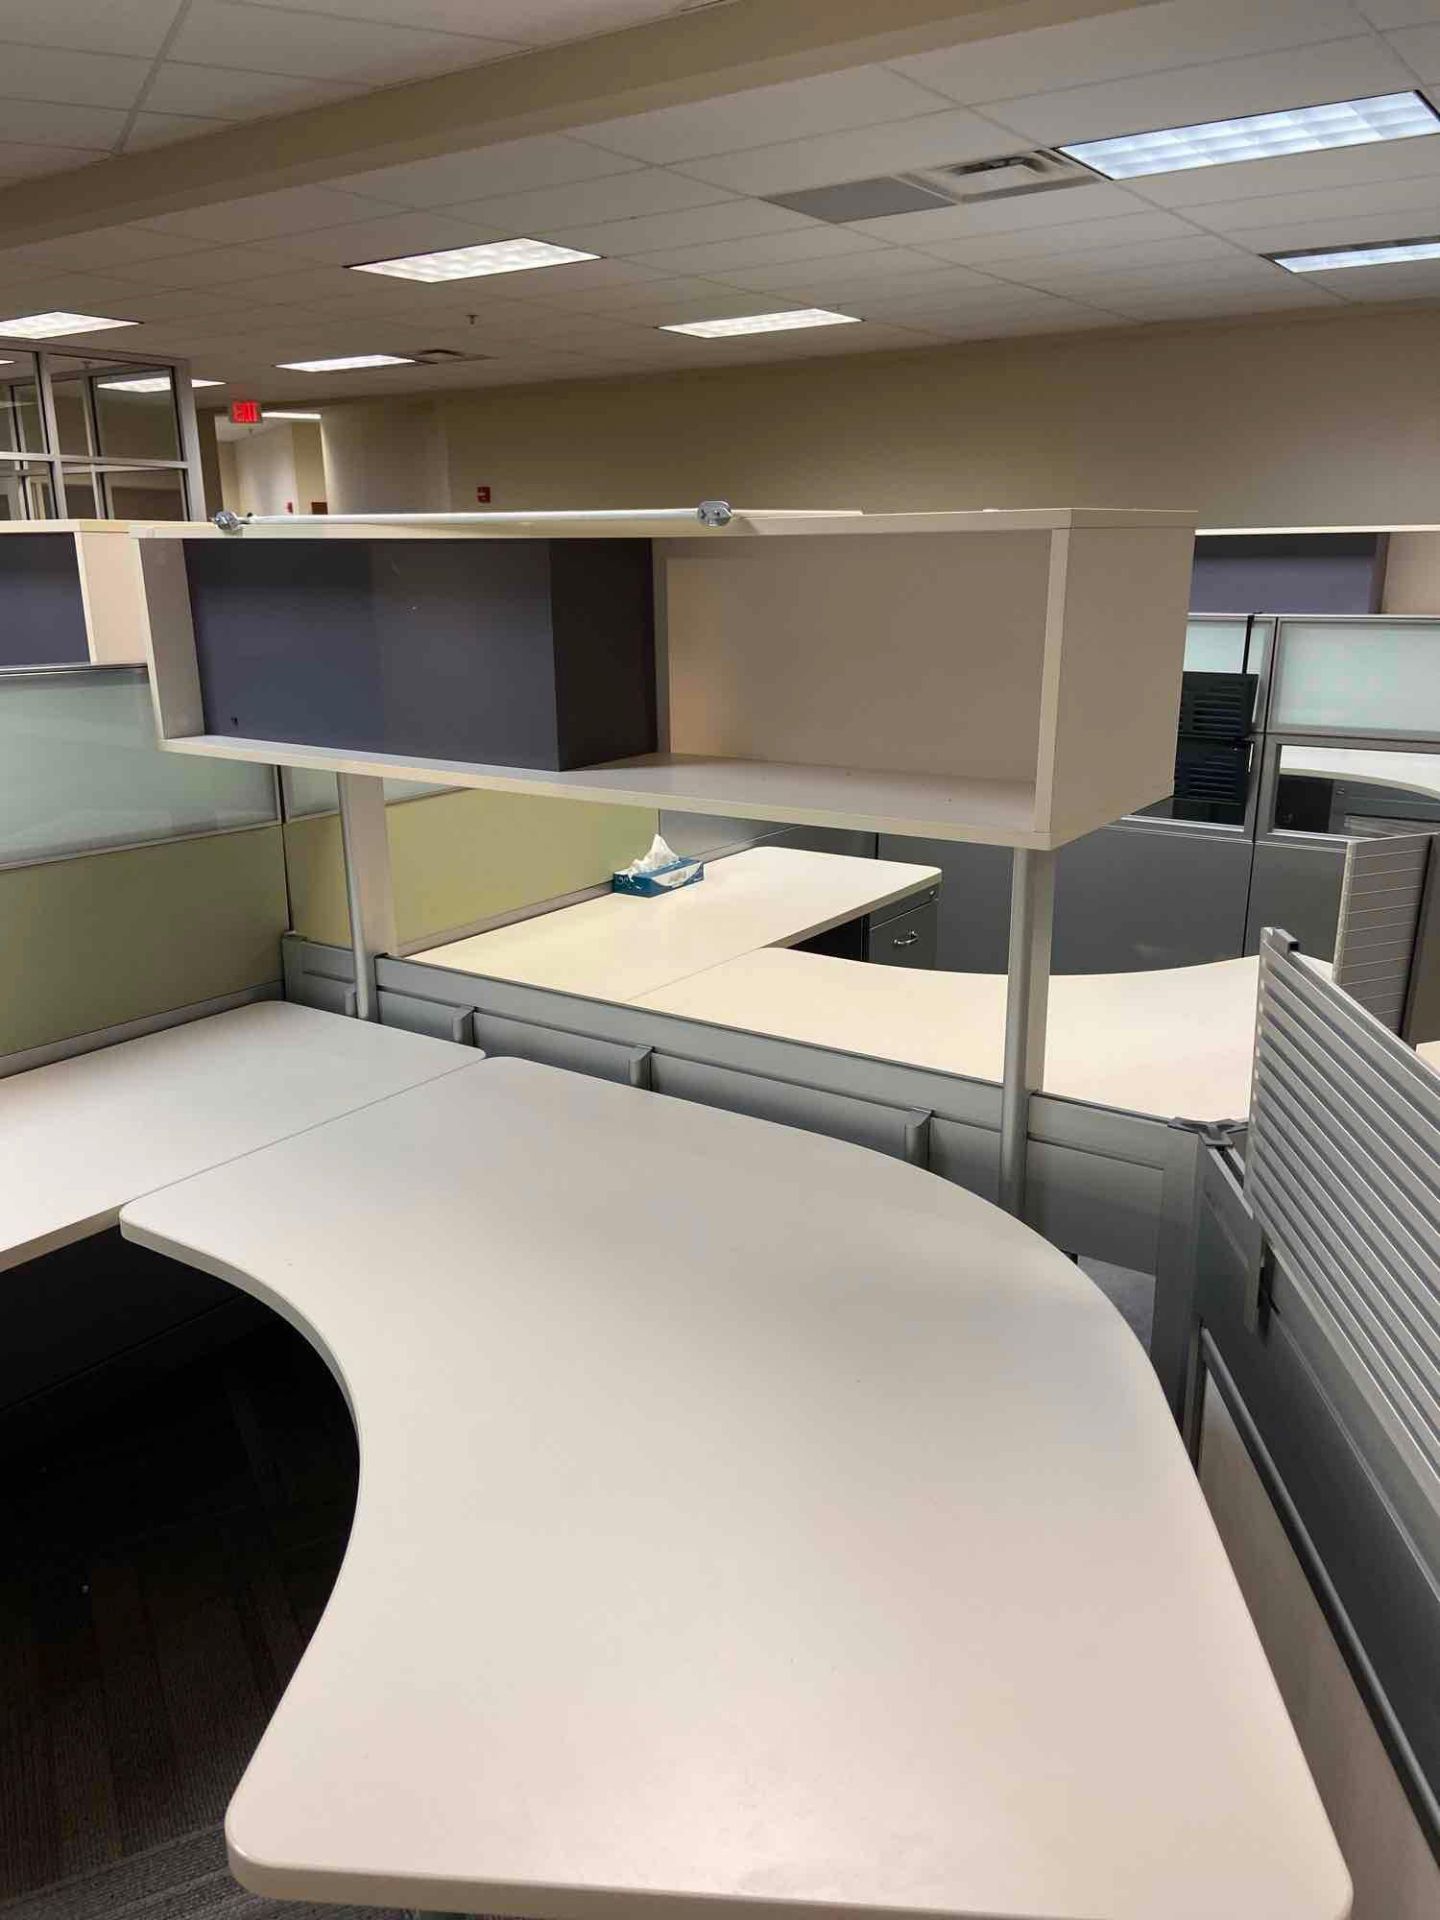 8-Sectional Cubicle w/ U-Shaped Table, 2-Drawer Box Files and Over Head Hutches - Image 3 of 9